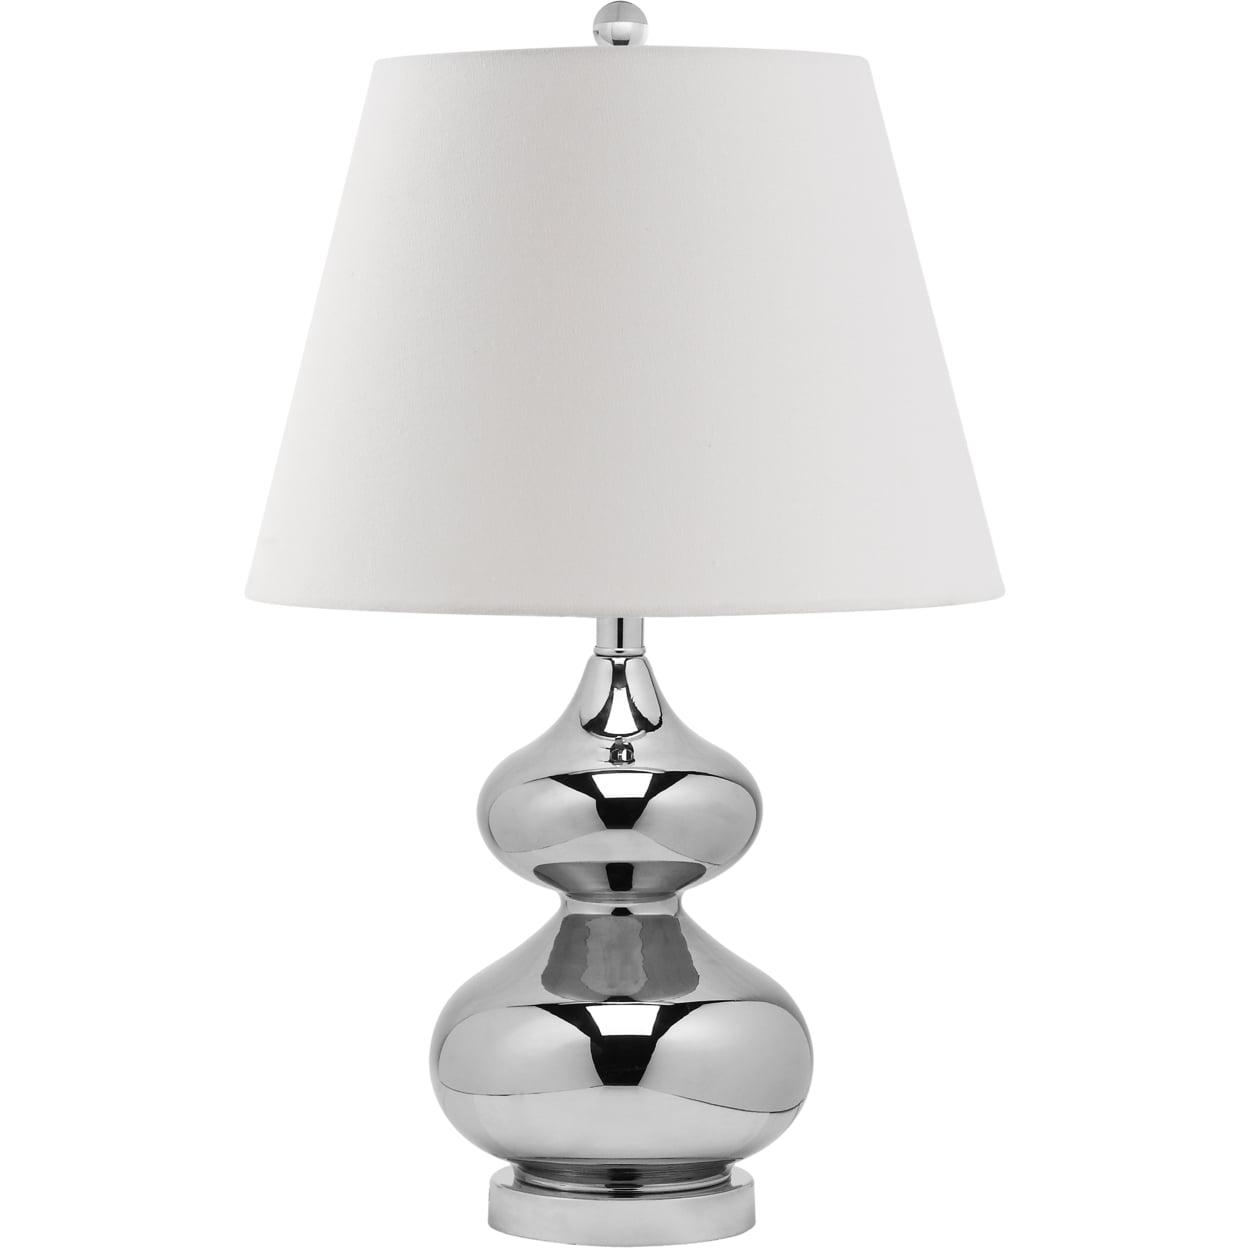 Eva 24" Double Gourd Silver Glass Table Lamp with Cotton Shade